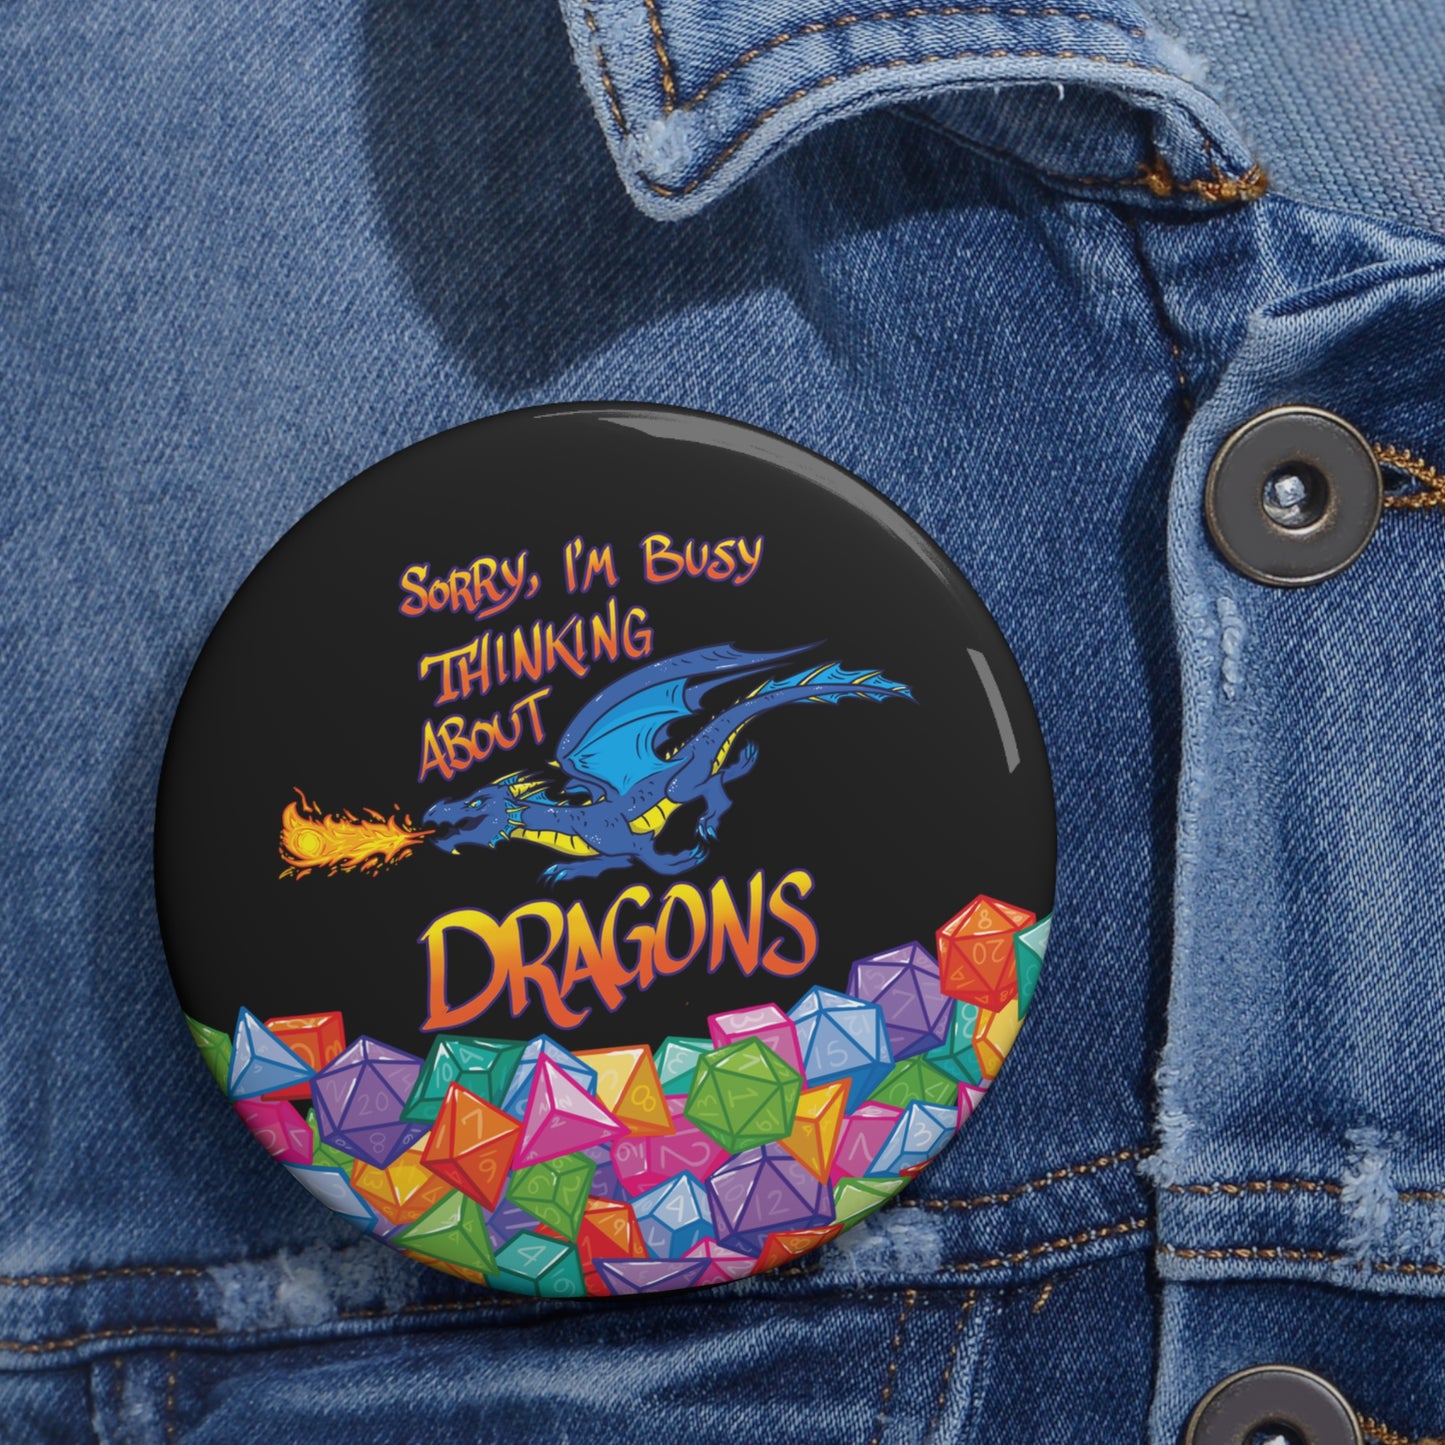 "Thinkin' About Dragons" Pin Buttons